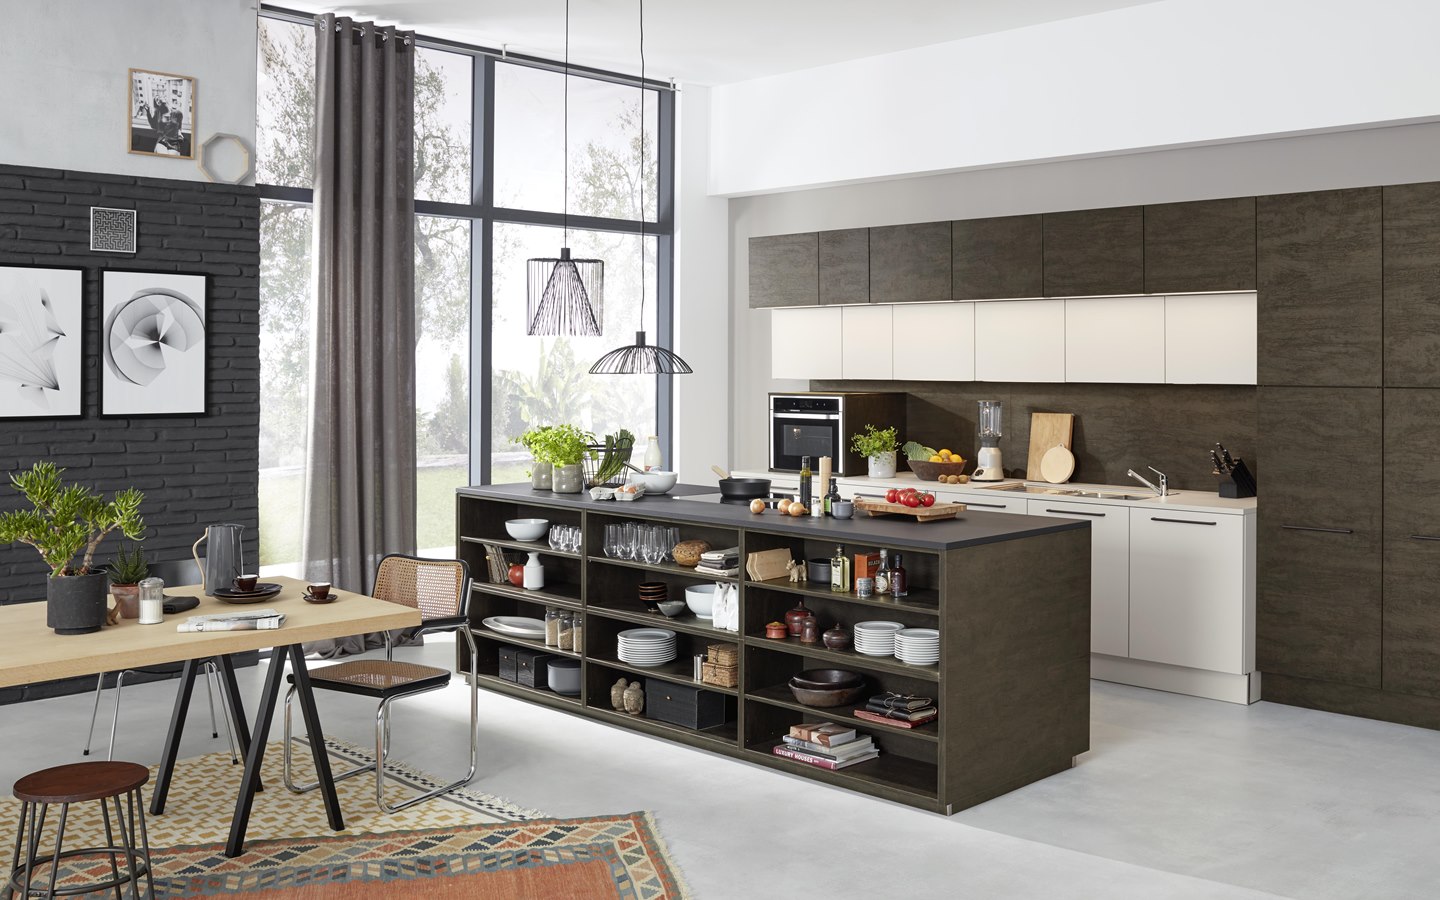 Combination kitchen/living room with shelves in kitchen island